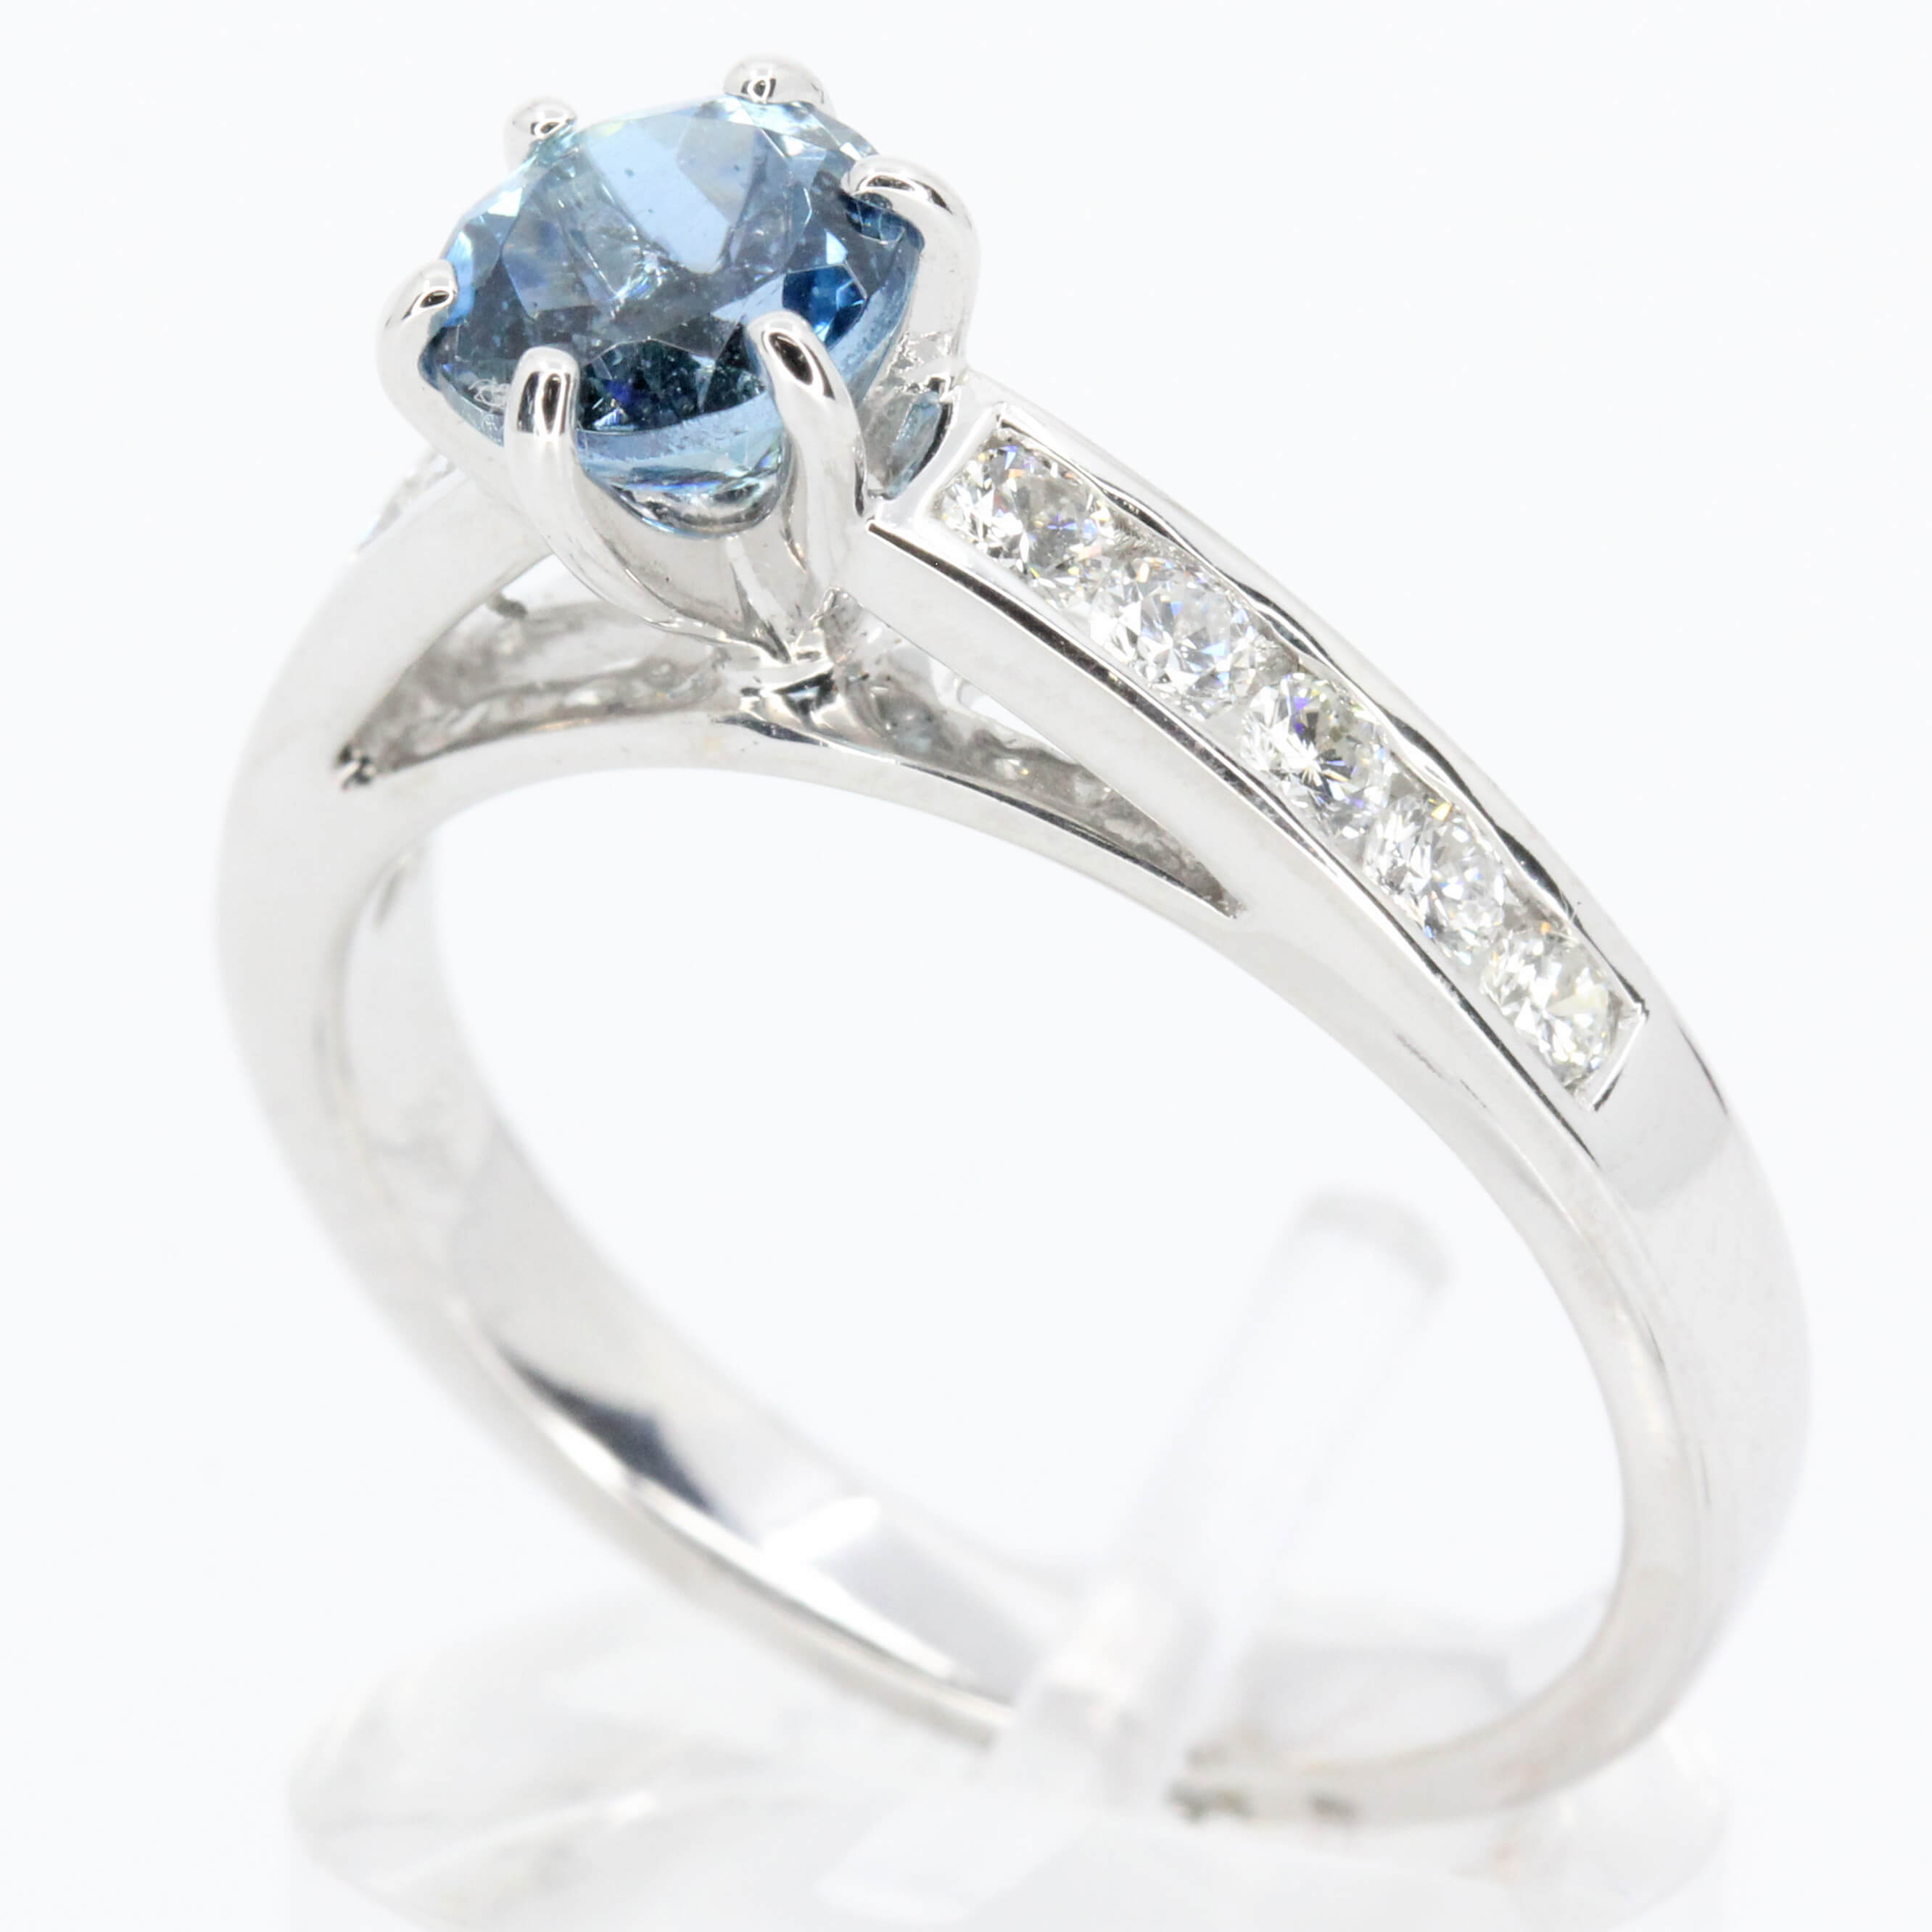 18ct White Gold Round Cut Aquamarine Ring with Accents of Diamonds ...